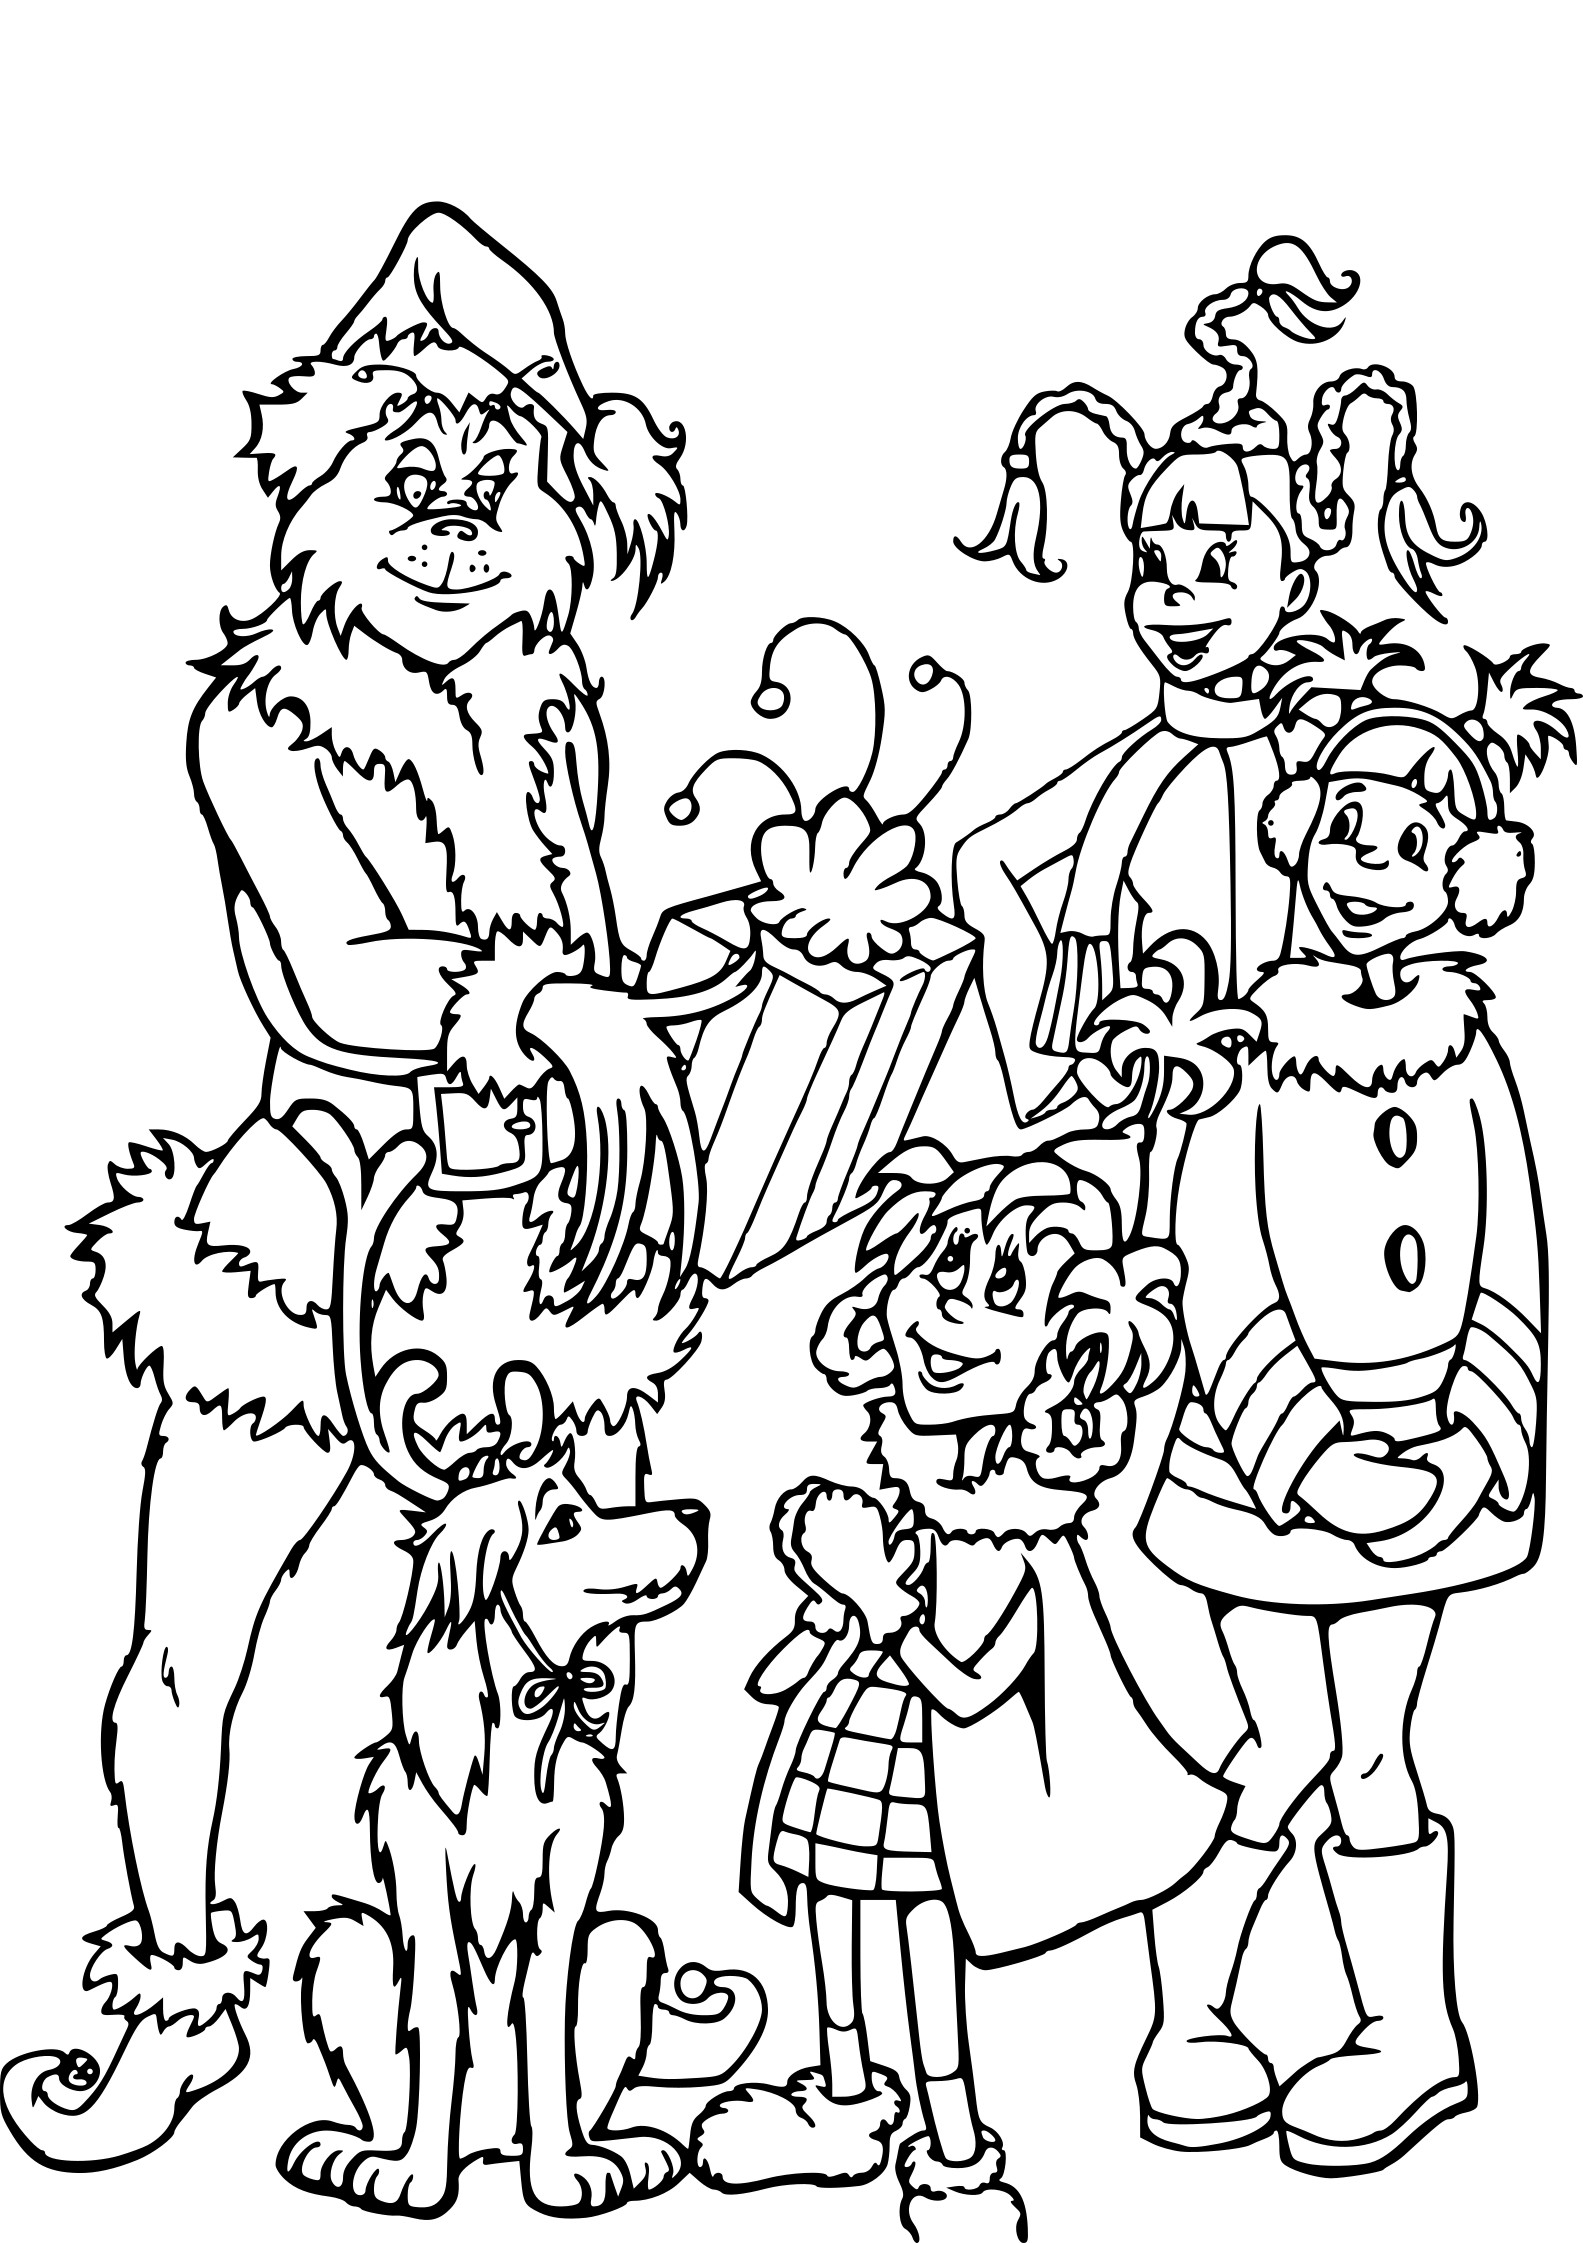 The Grinch drawing and coloring page